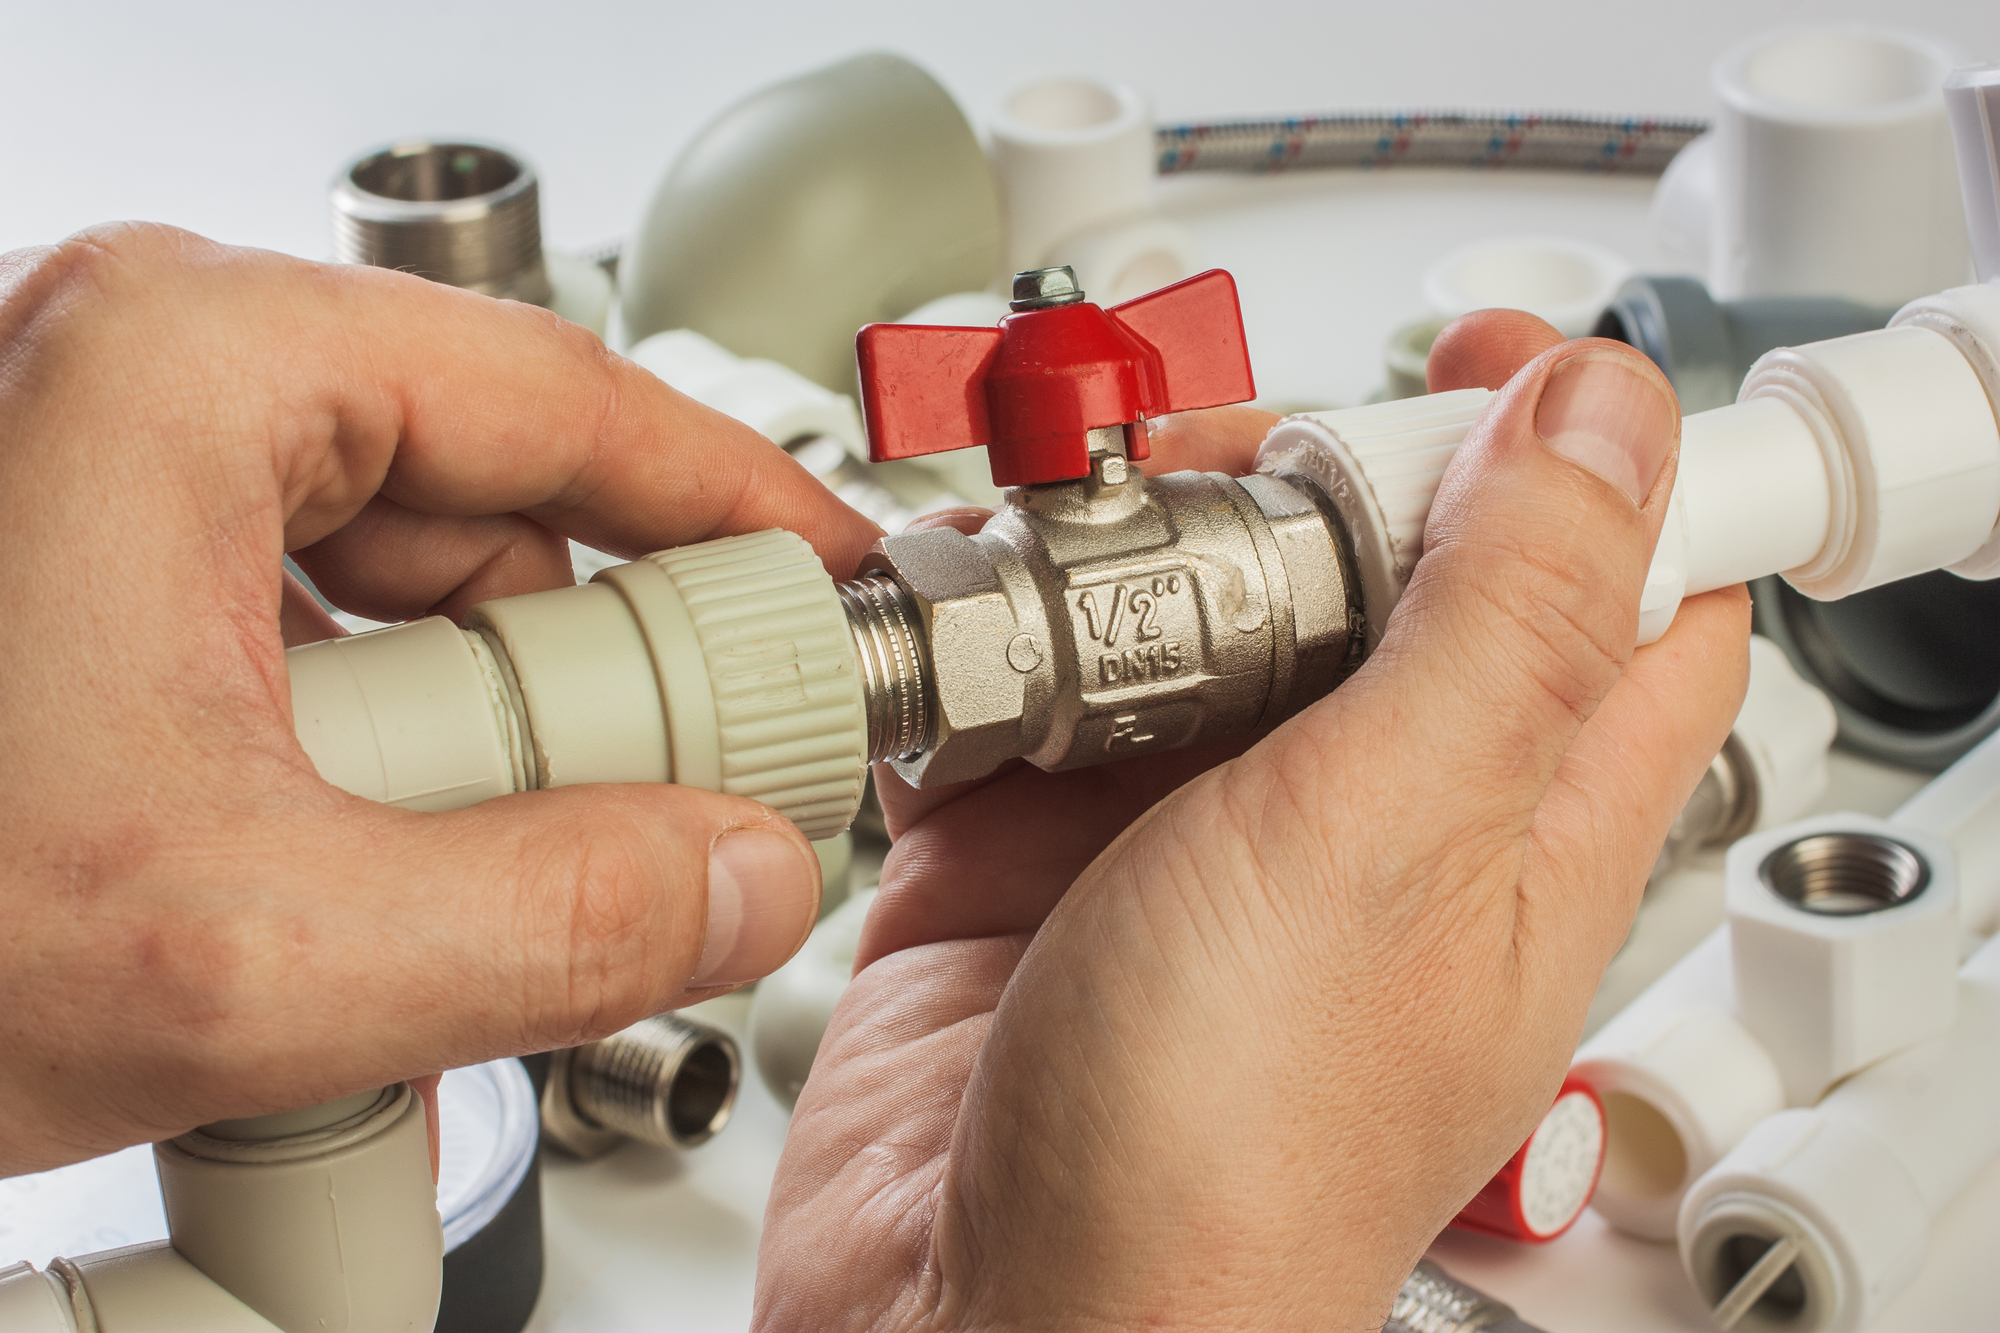 A Comprehensive Guide to Piper’s Plumbing Products for Your Home